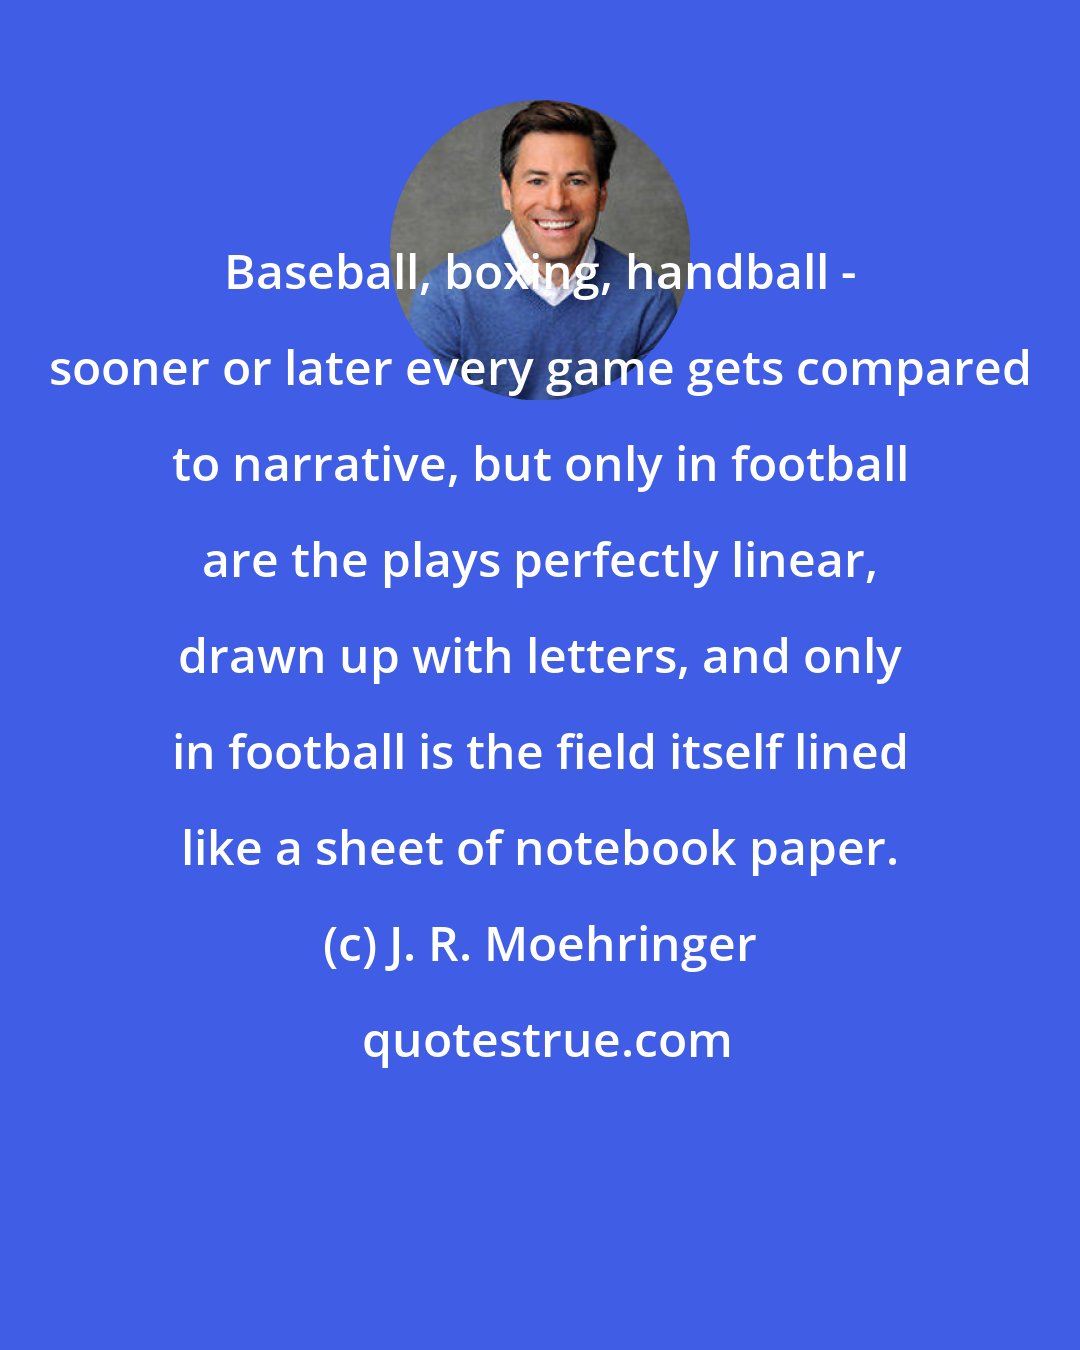 J. R. Moehringer: Baseball, boxing, handball - sooner or later every game gets compared to narrative, but only in football are the plays perfectly linear, drawn up with letters, and only in football is the field itself lined like a sheet of notebook paper.